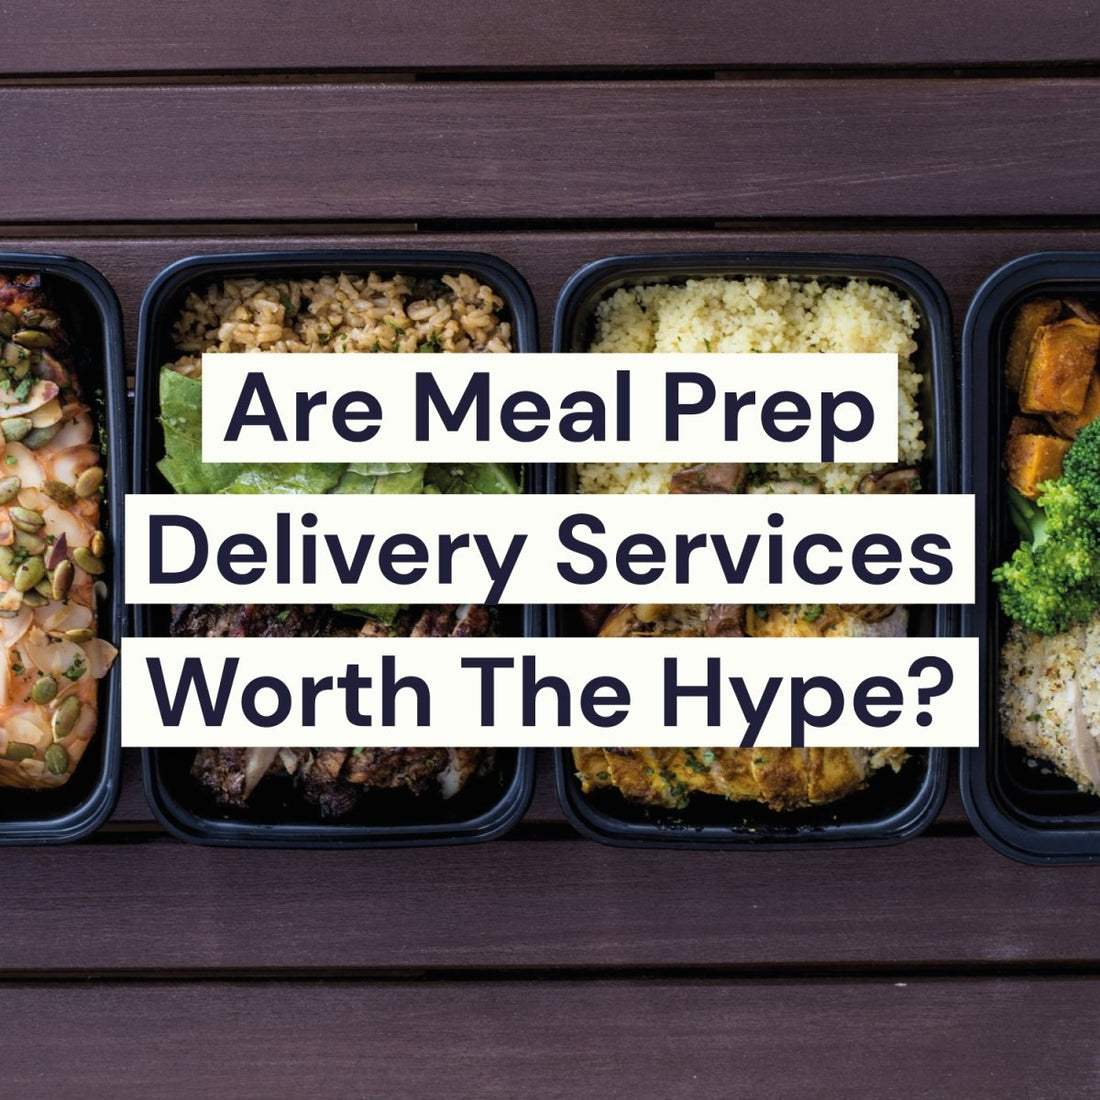 Are meal prep delivery services worth it? - The Meal Prep Market